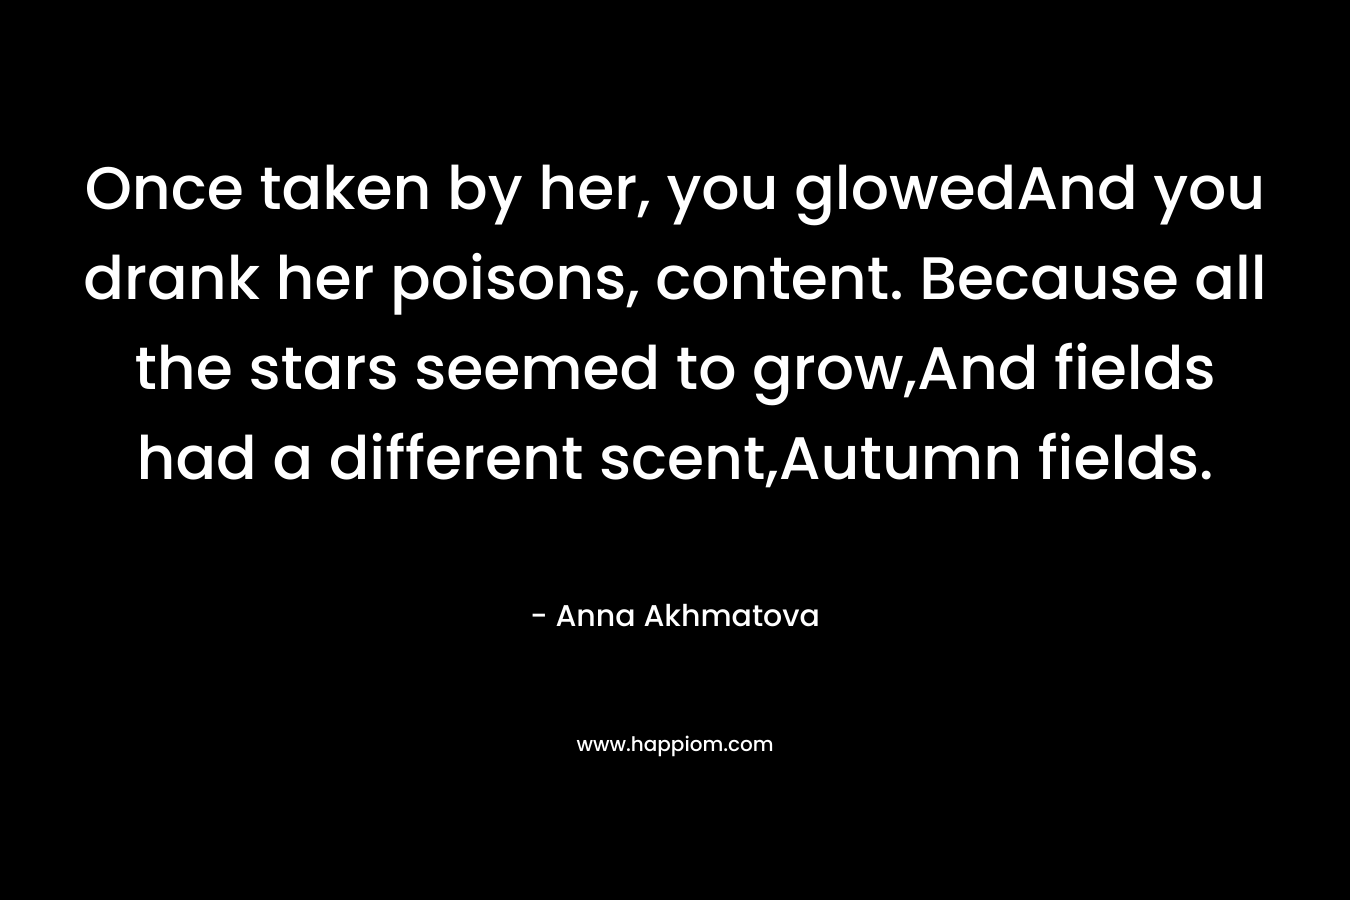 Once taken by her, you glowedAnd you drank her poisons, content. Because all the stars seemed to grow,And fields had a different scent,Autumn fields. – Anna Akhmatova